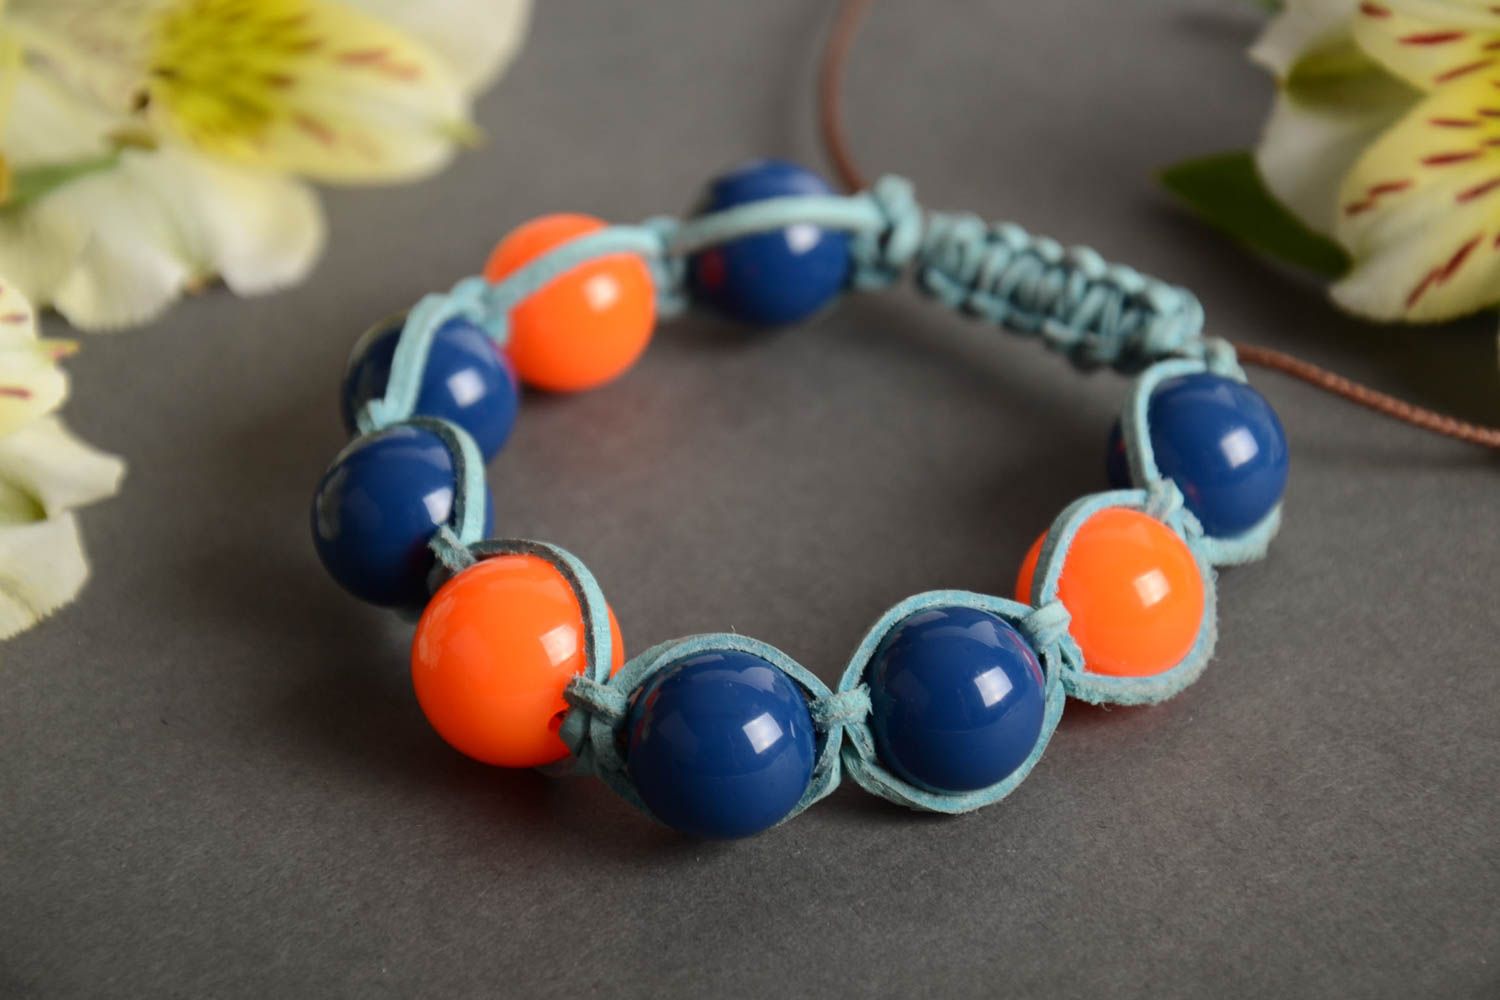 Handmade wrist bracelet woven of blue waxed cord and colorful plastic beads photo 1